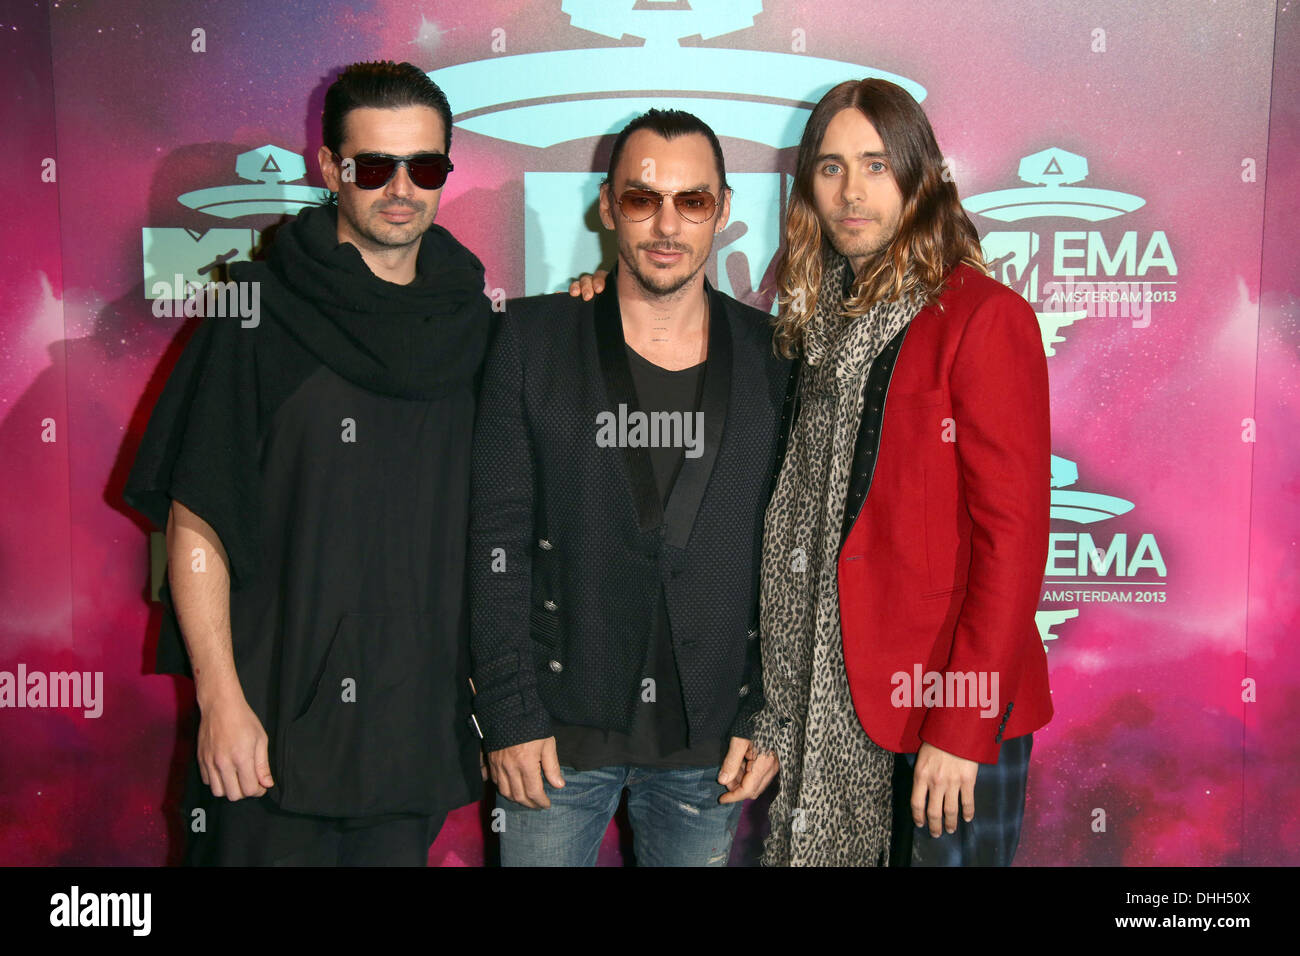 the Ziggo Dome, Amsterdam, the Netherlands. 10th Nov, 2013. Member of the US band 30 Seconds to Mars, (L-R) Tomislav Milicevic, Shannon Leto and Jared Leto arrive at the MTV Europe Music Awards 2013 ceremony in the Ziggo Dome, Amsterdam, the Netherlands, 10 November 2013. Photo: Hubert Boesl/dpa/Alamy Live News Stock Photo